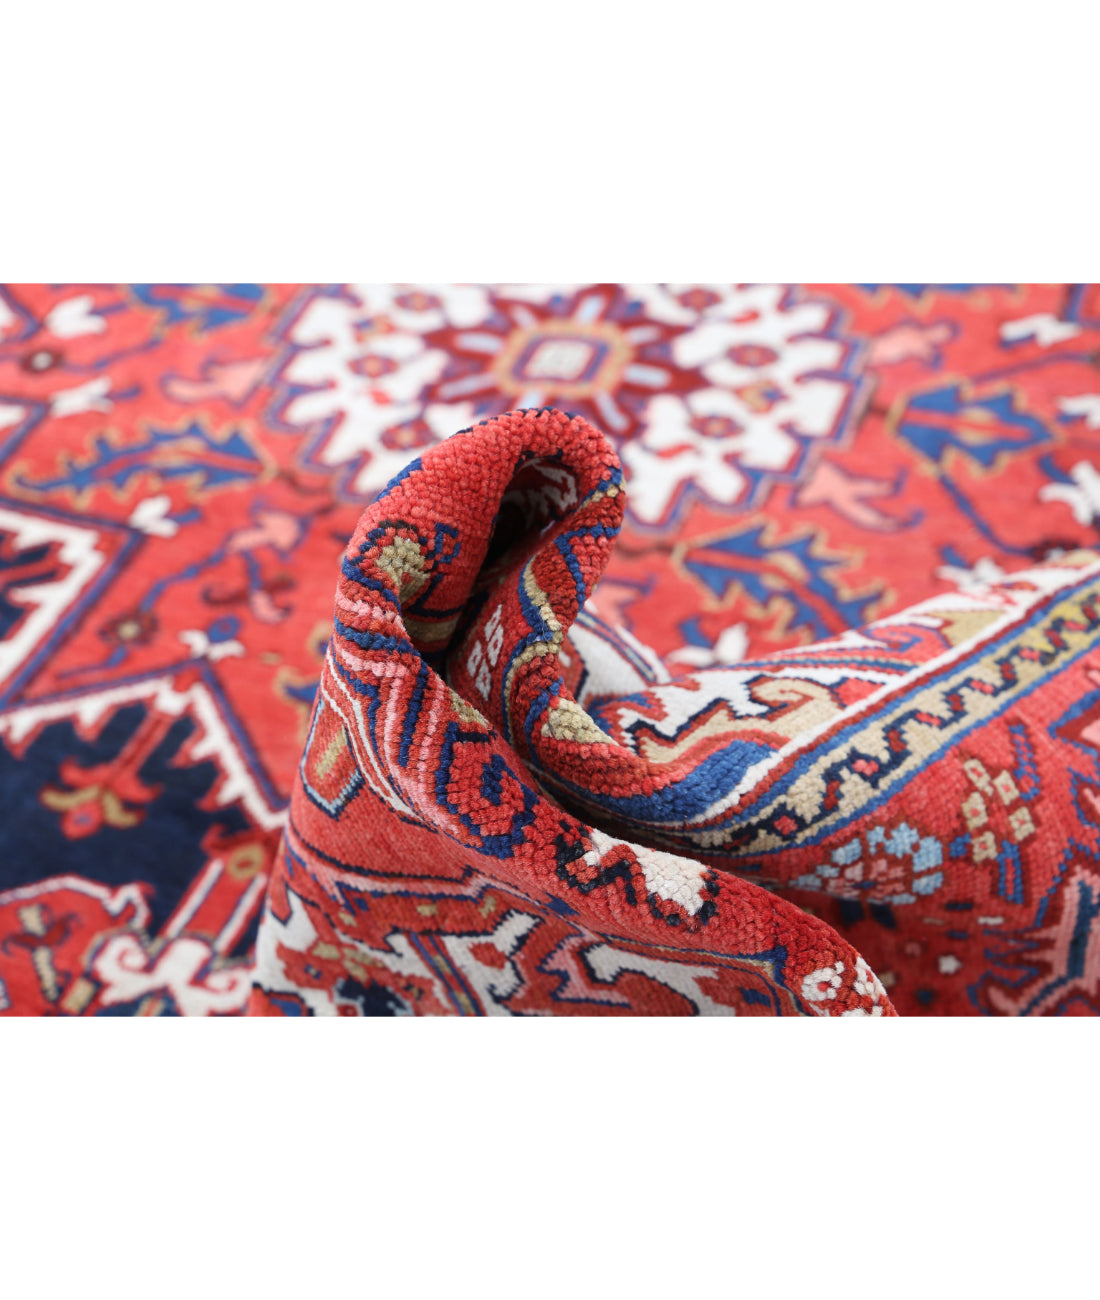 Hand Knotted Antique Persian Heriz Wool Rug - 8'10'' x 10'11'' 8'10'' x 10'11'' (265 X 328) / Blue / Red